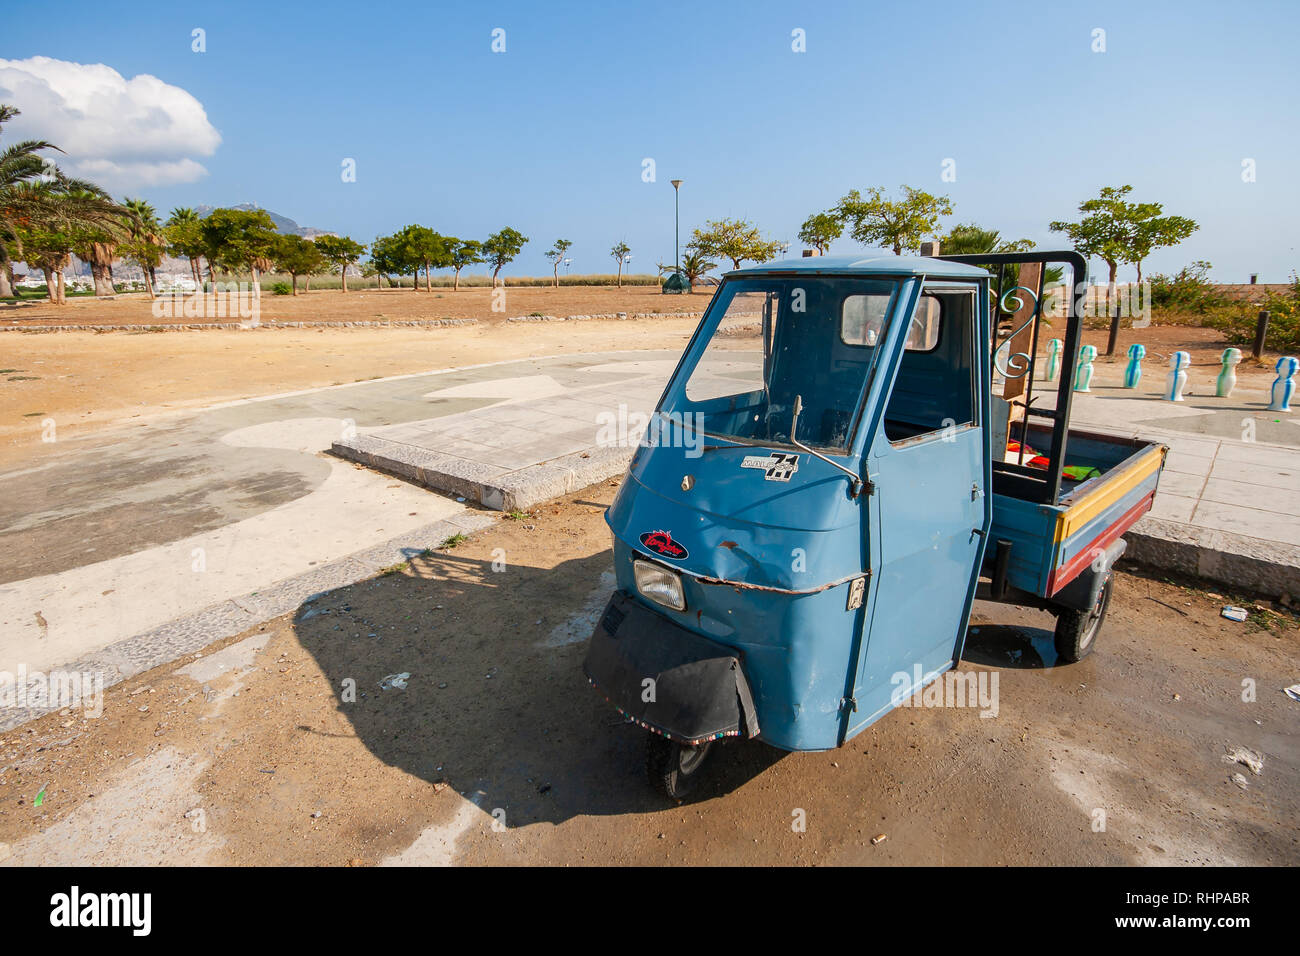 PALERMO / SICILY - SEPTEMBER 15, 2011: Piaggio Ape, classical italian three wheled vehicle based on a Vespa scooter Stock Photo